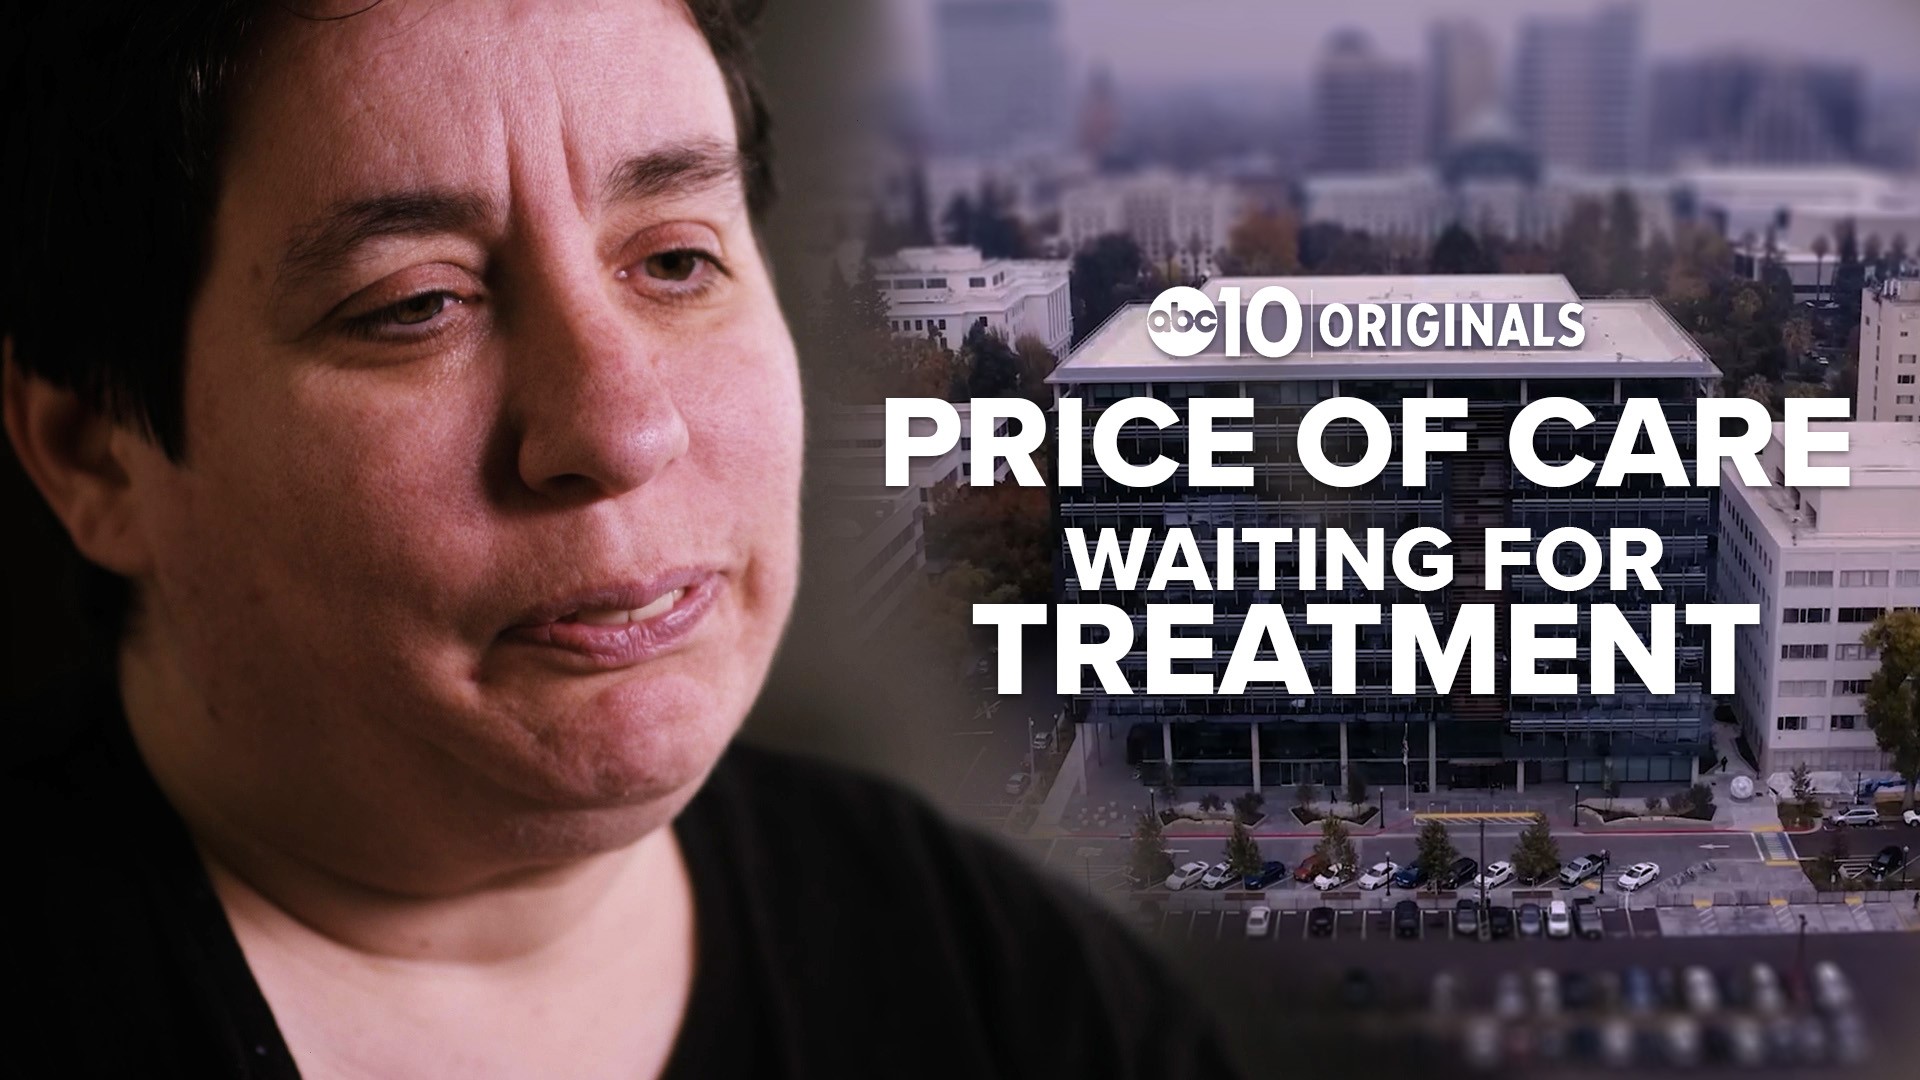 She’s not alone. An ABC10 investigation into conservatorships, The Price of Care, has uncovered abuse and a lack of response impacting thousands of people.